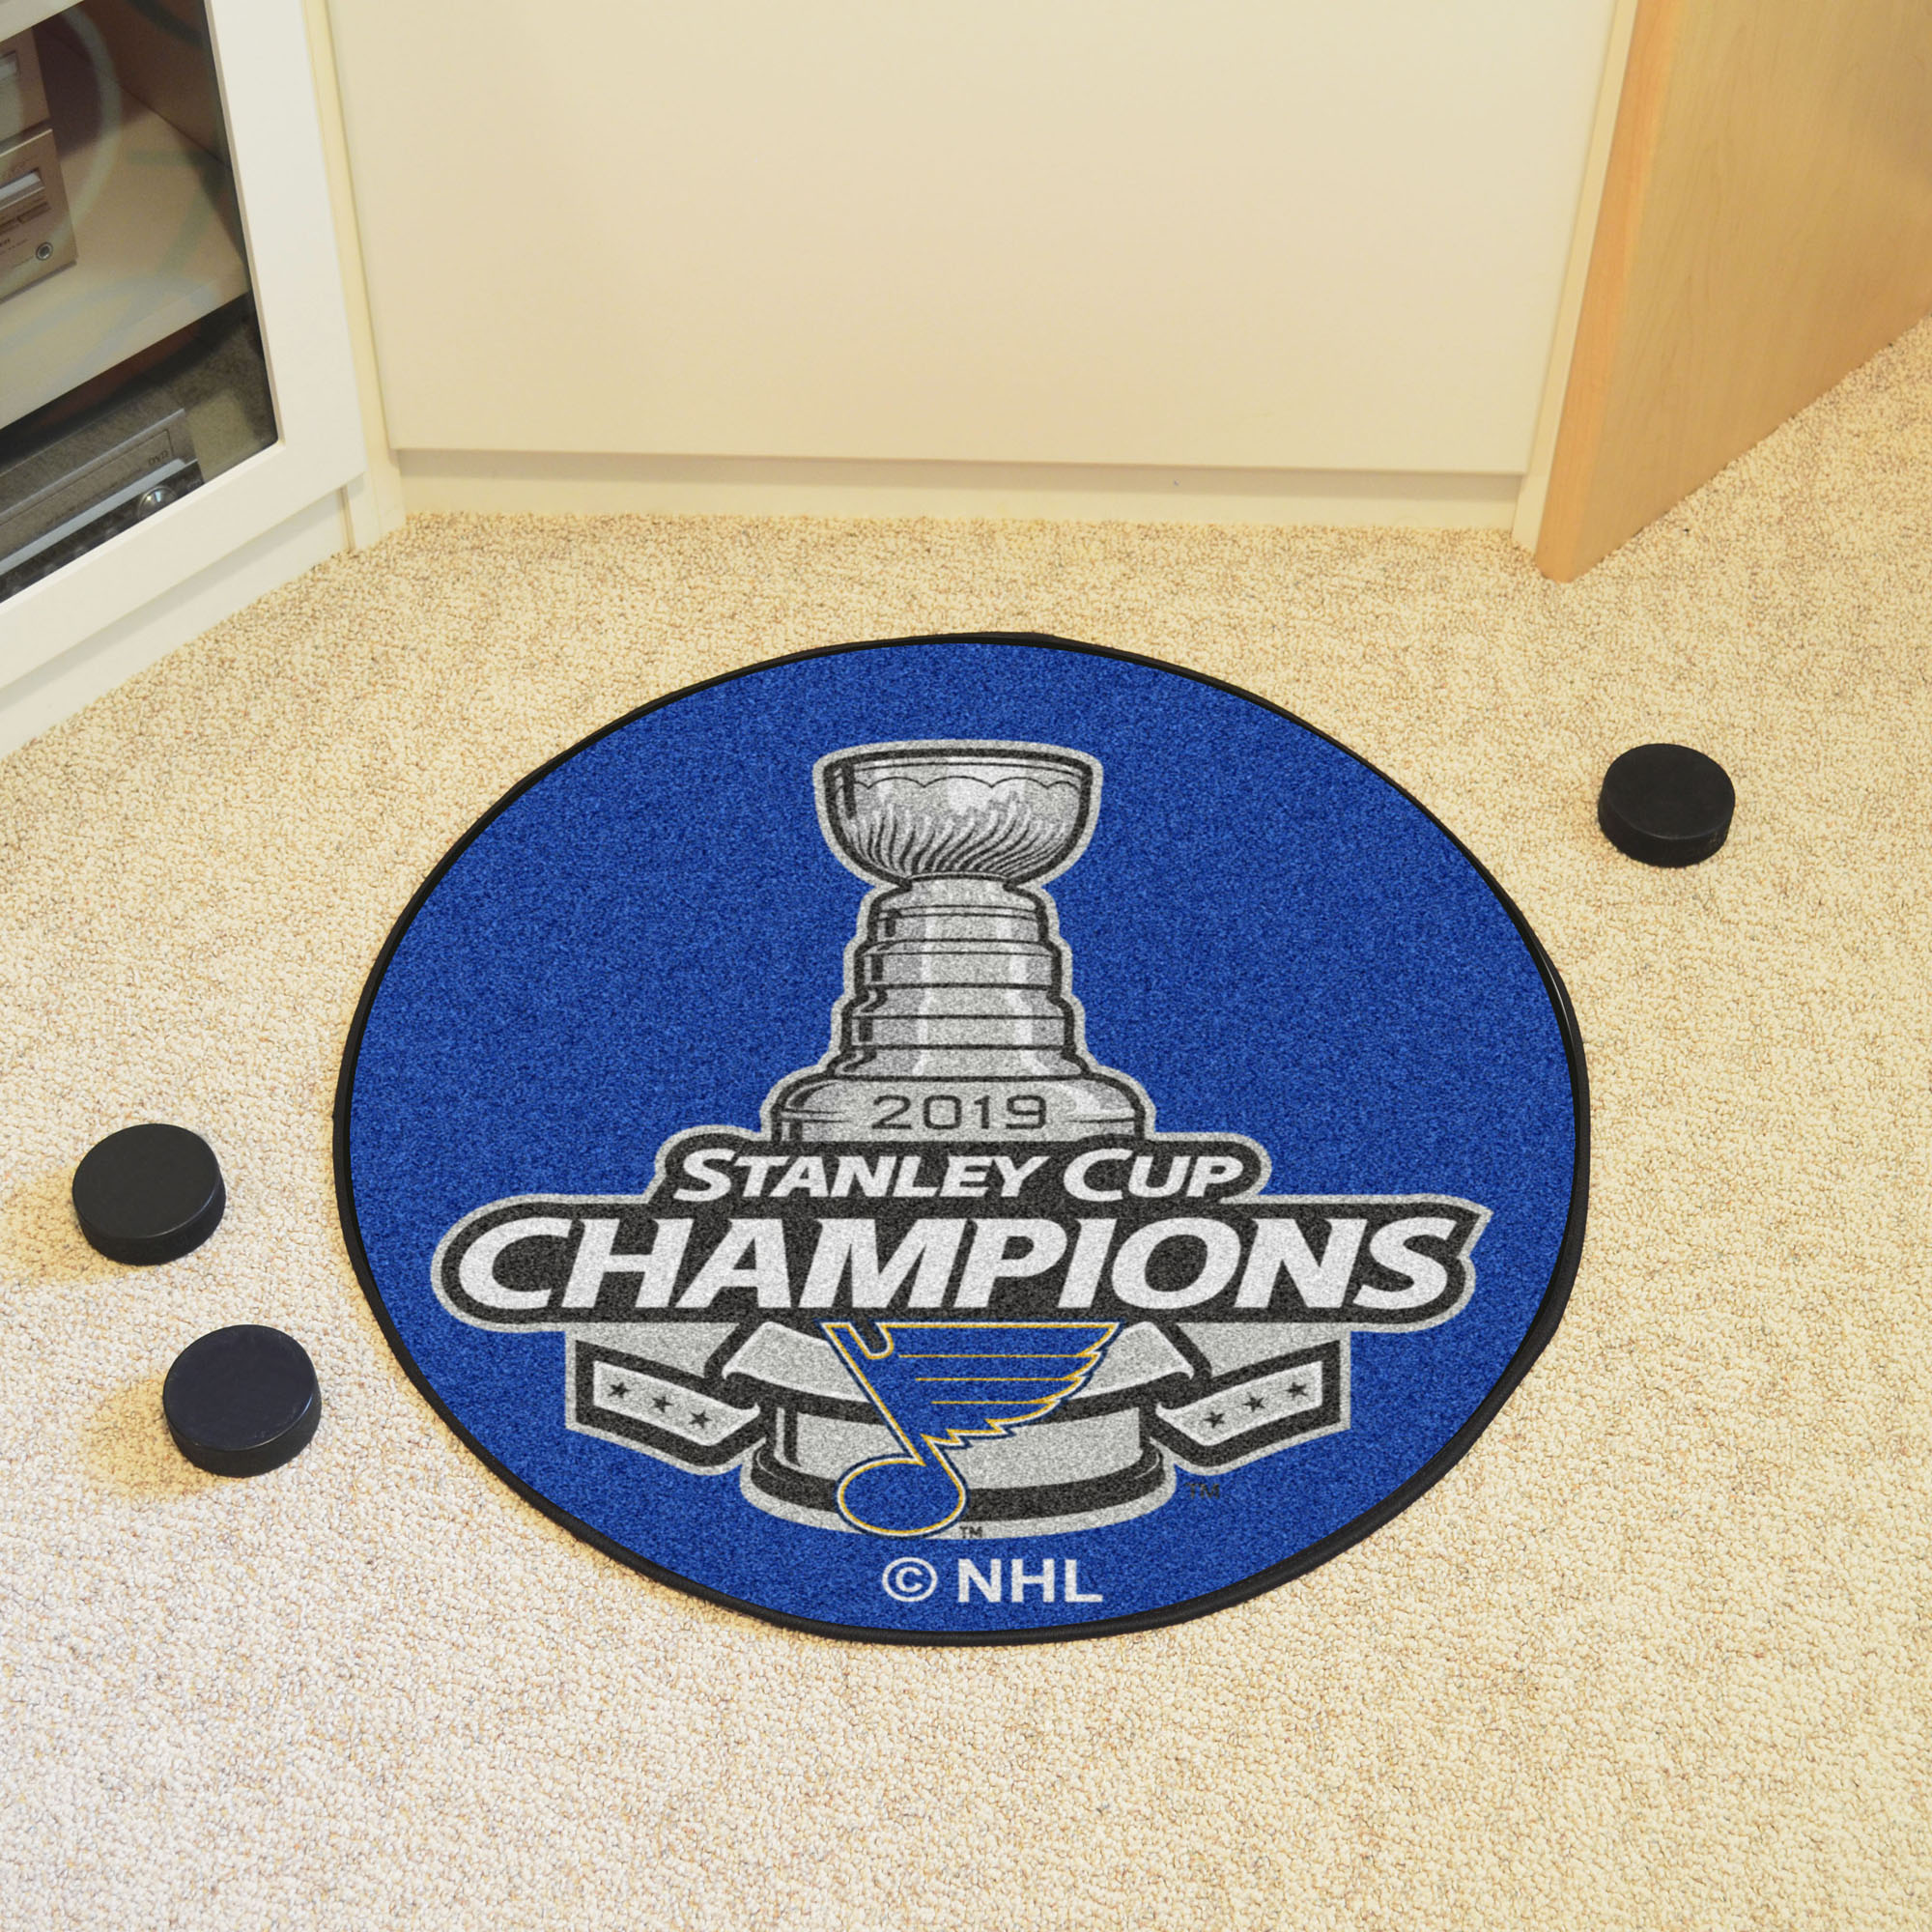 St. Louis Blues 2019 Stanley Cup Champions Hockey Puck Shaped Area Rug - 27"